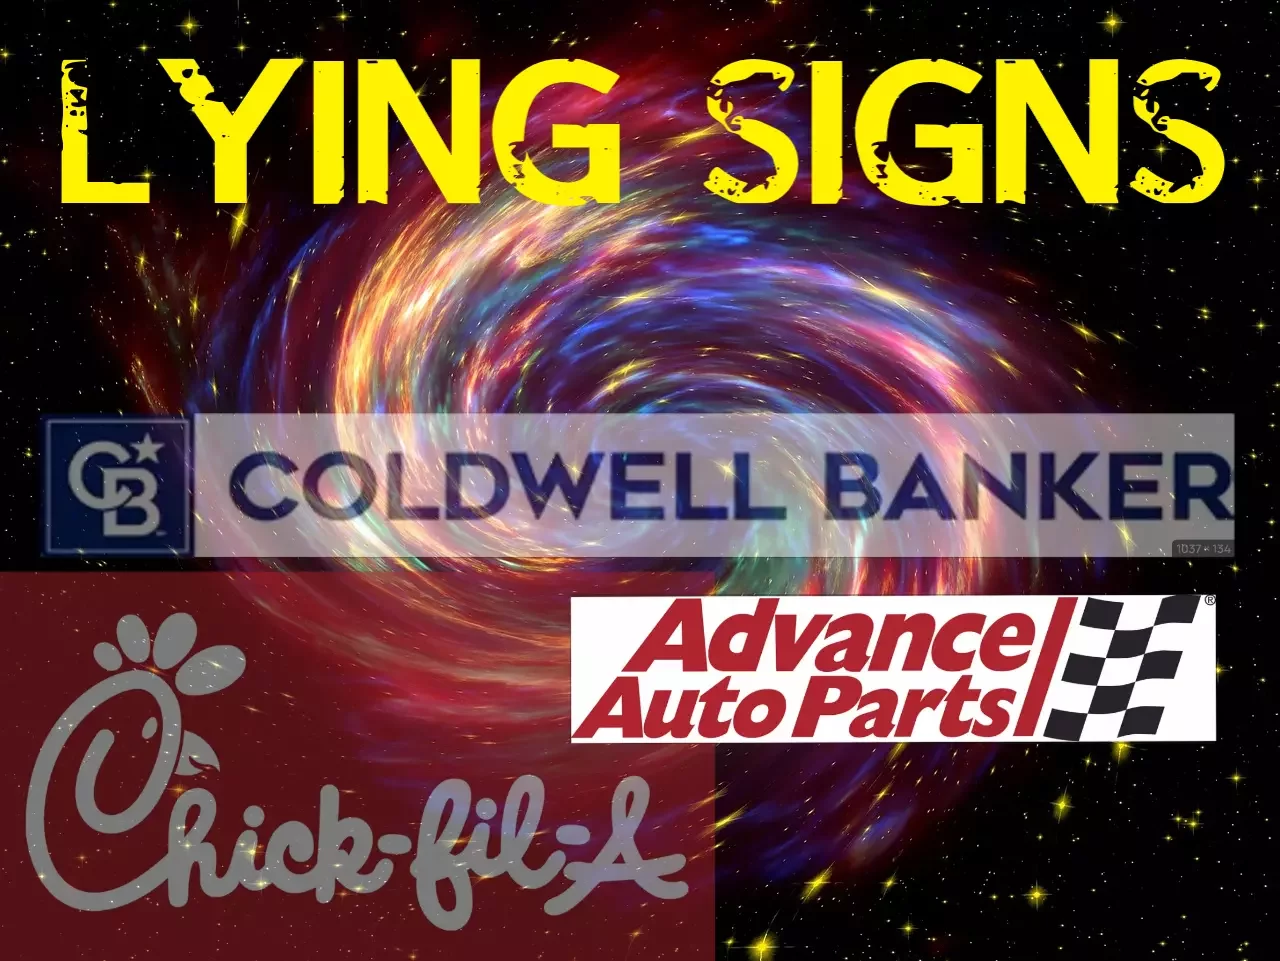 LYING SIGNS ADVANCED AUTO PARTS CHIC FIL A CALDWELL BANKER